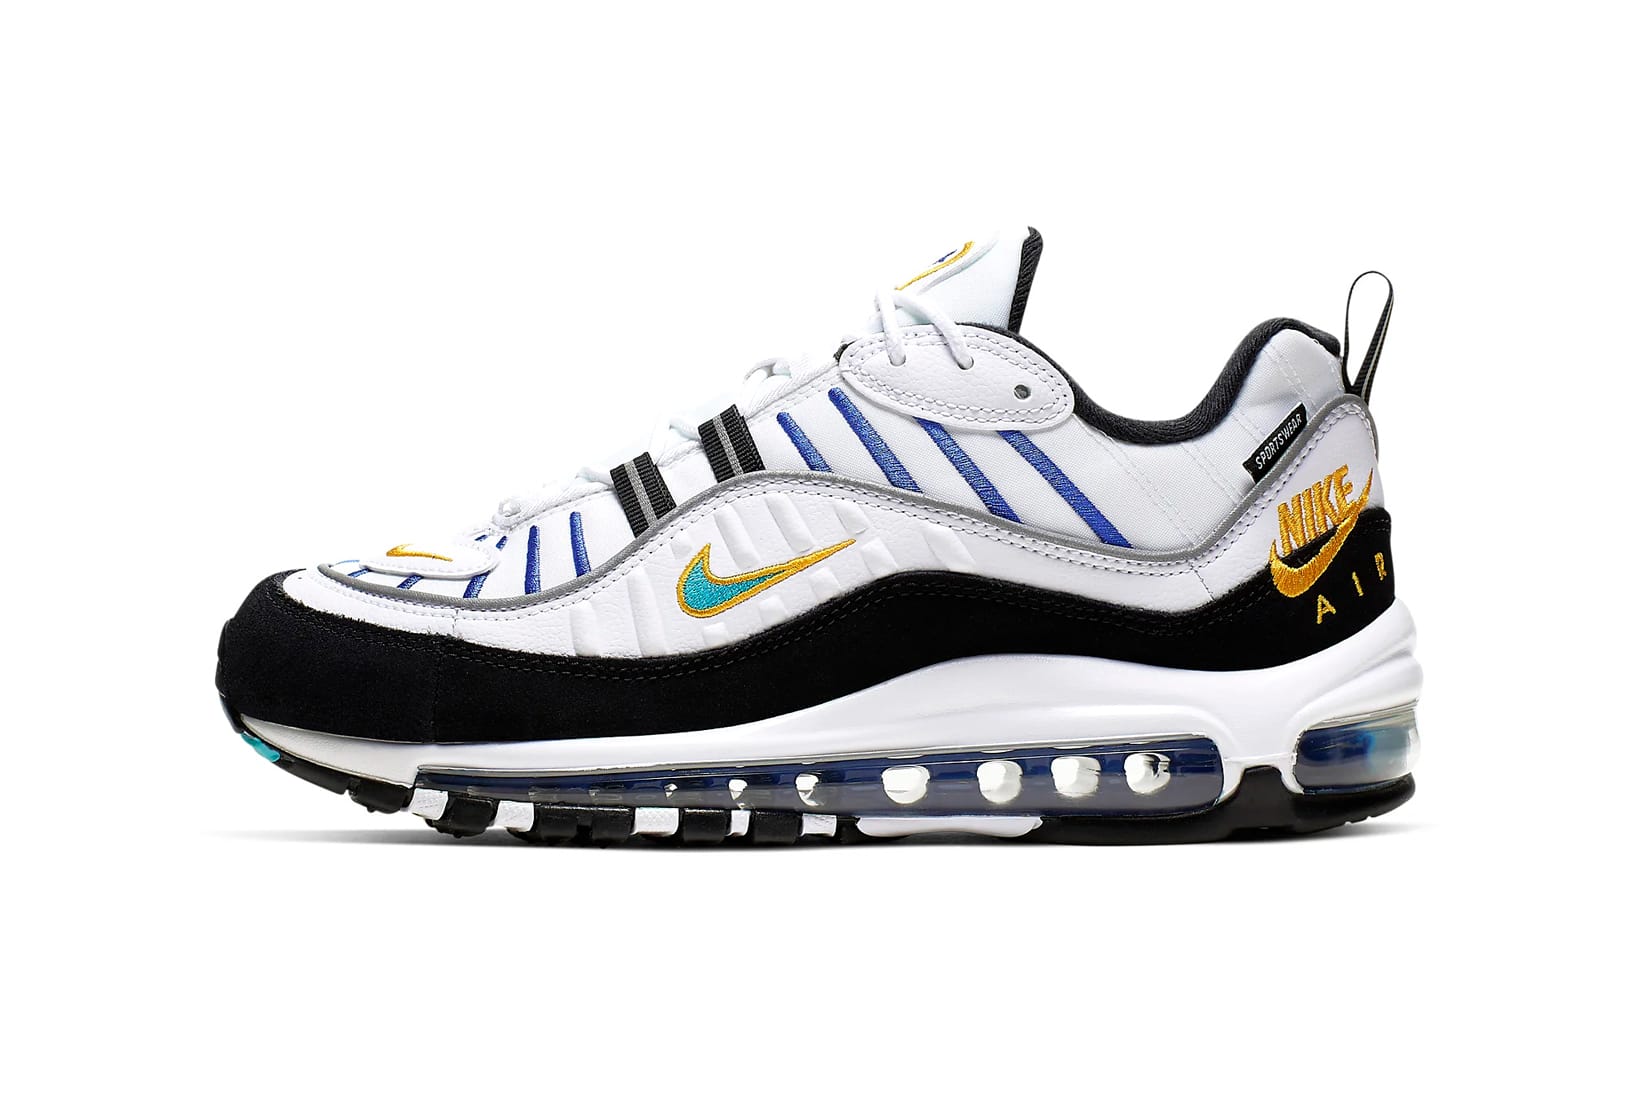 Nike Releases Air Max 98 in University Gold | HYPEBAE